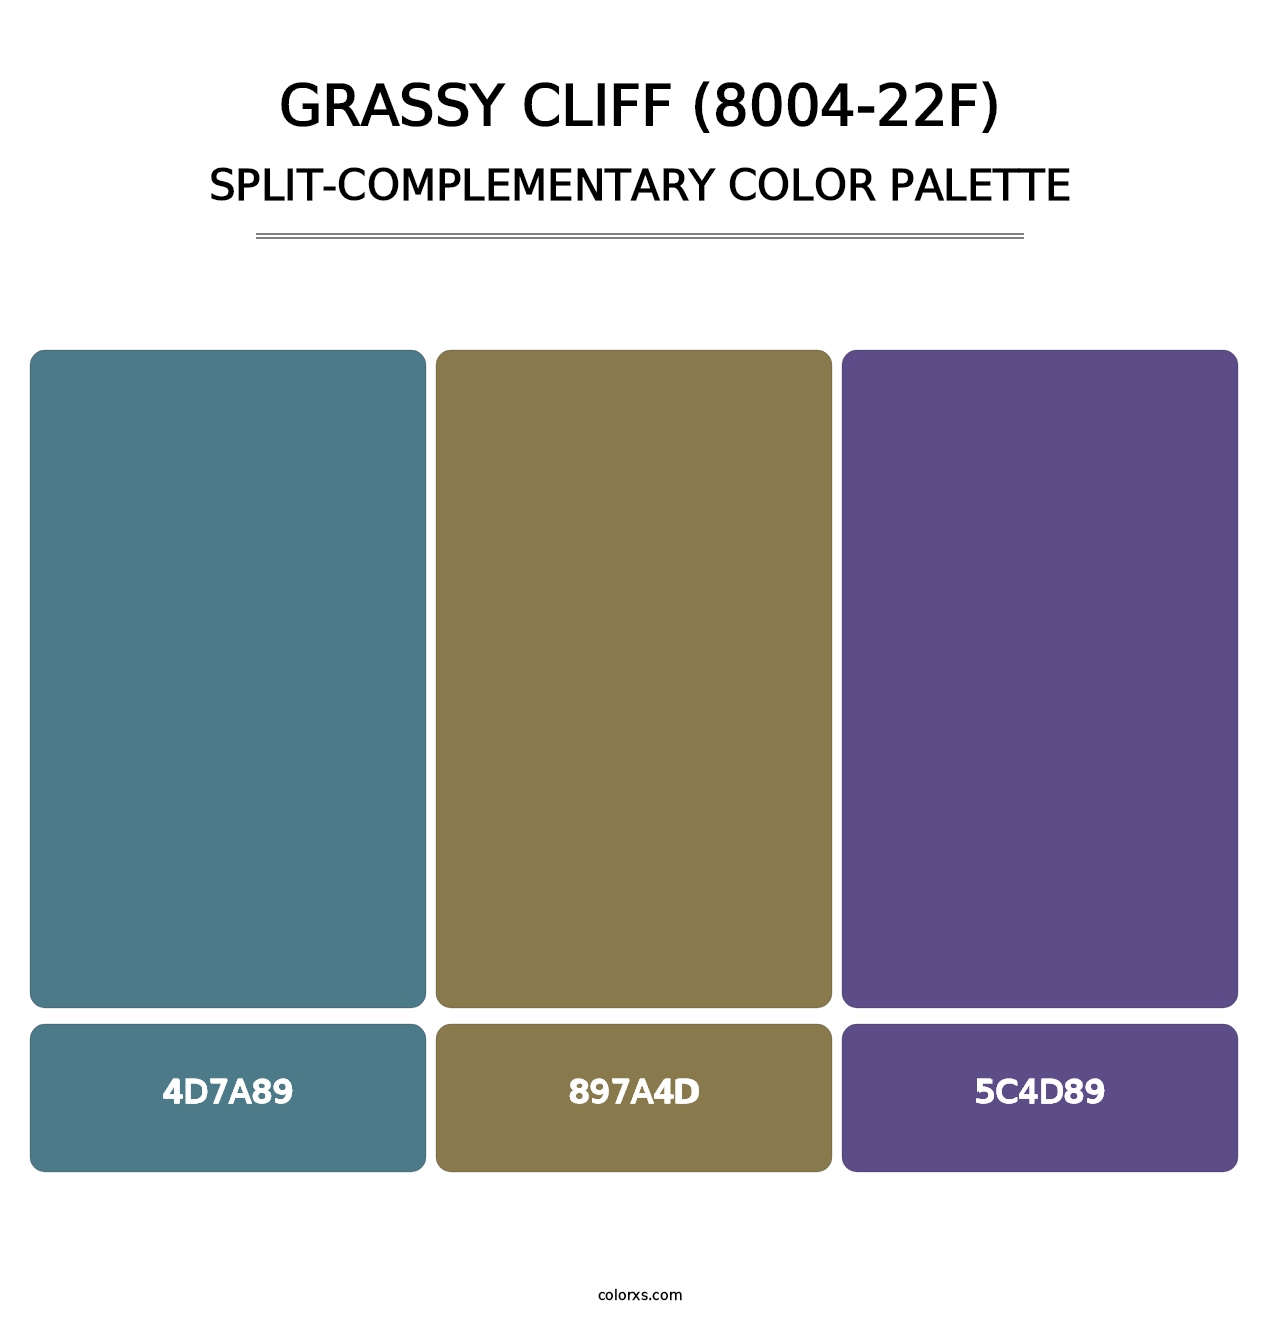 Grassy Cliff (8004-22F) - Split-Complementary Color Palette